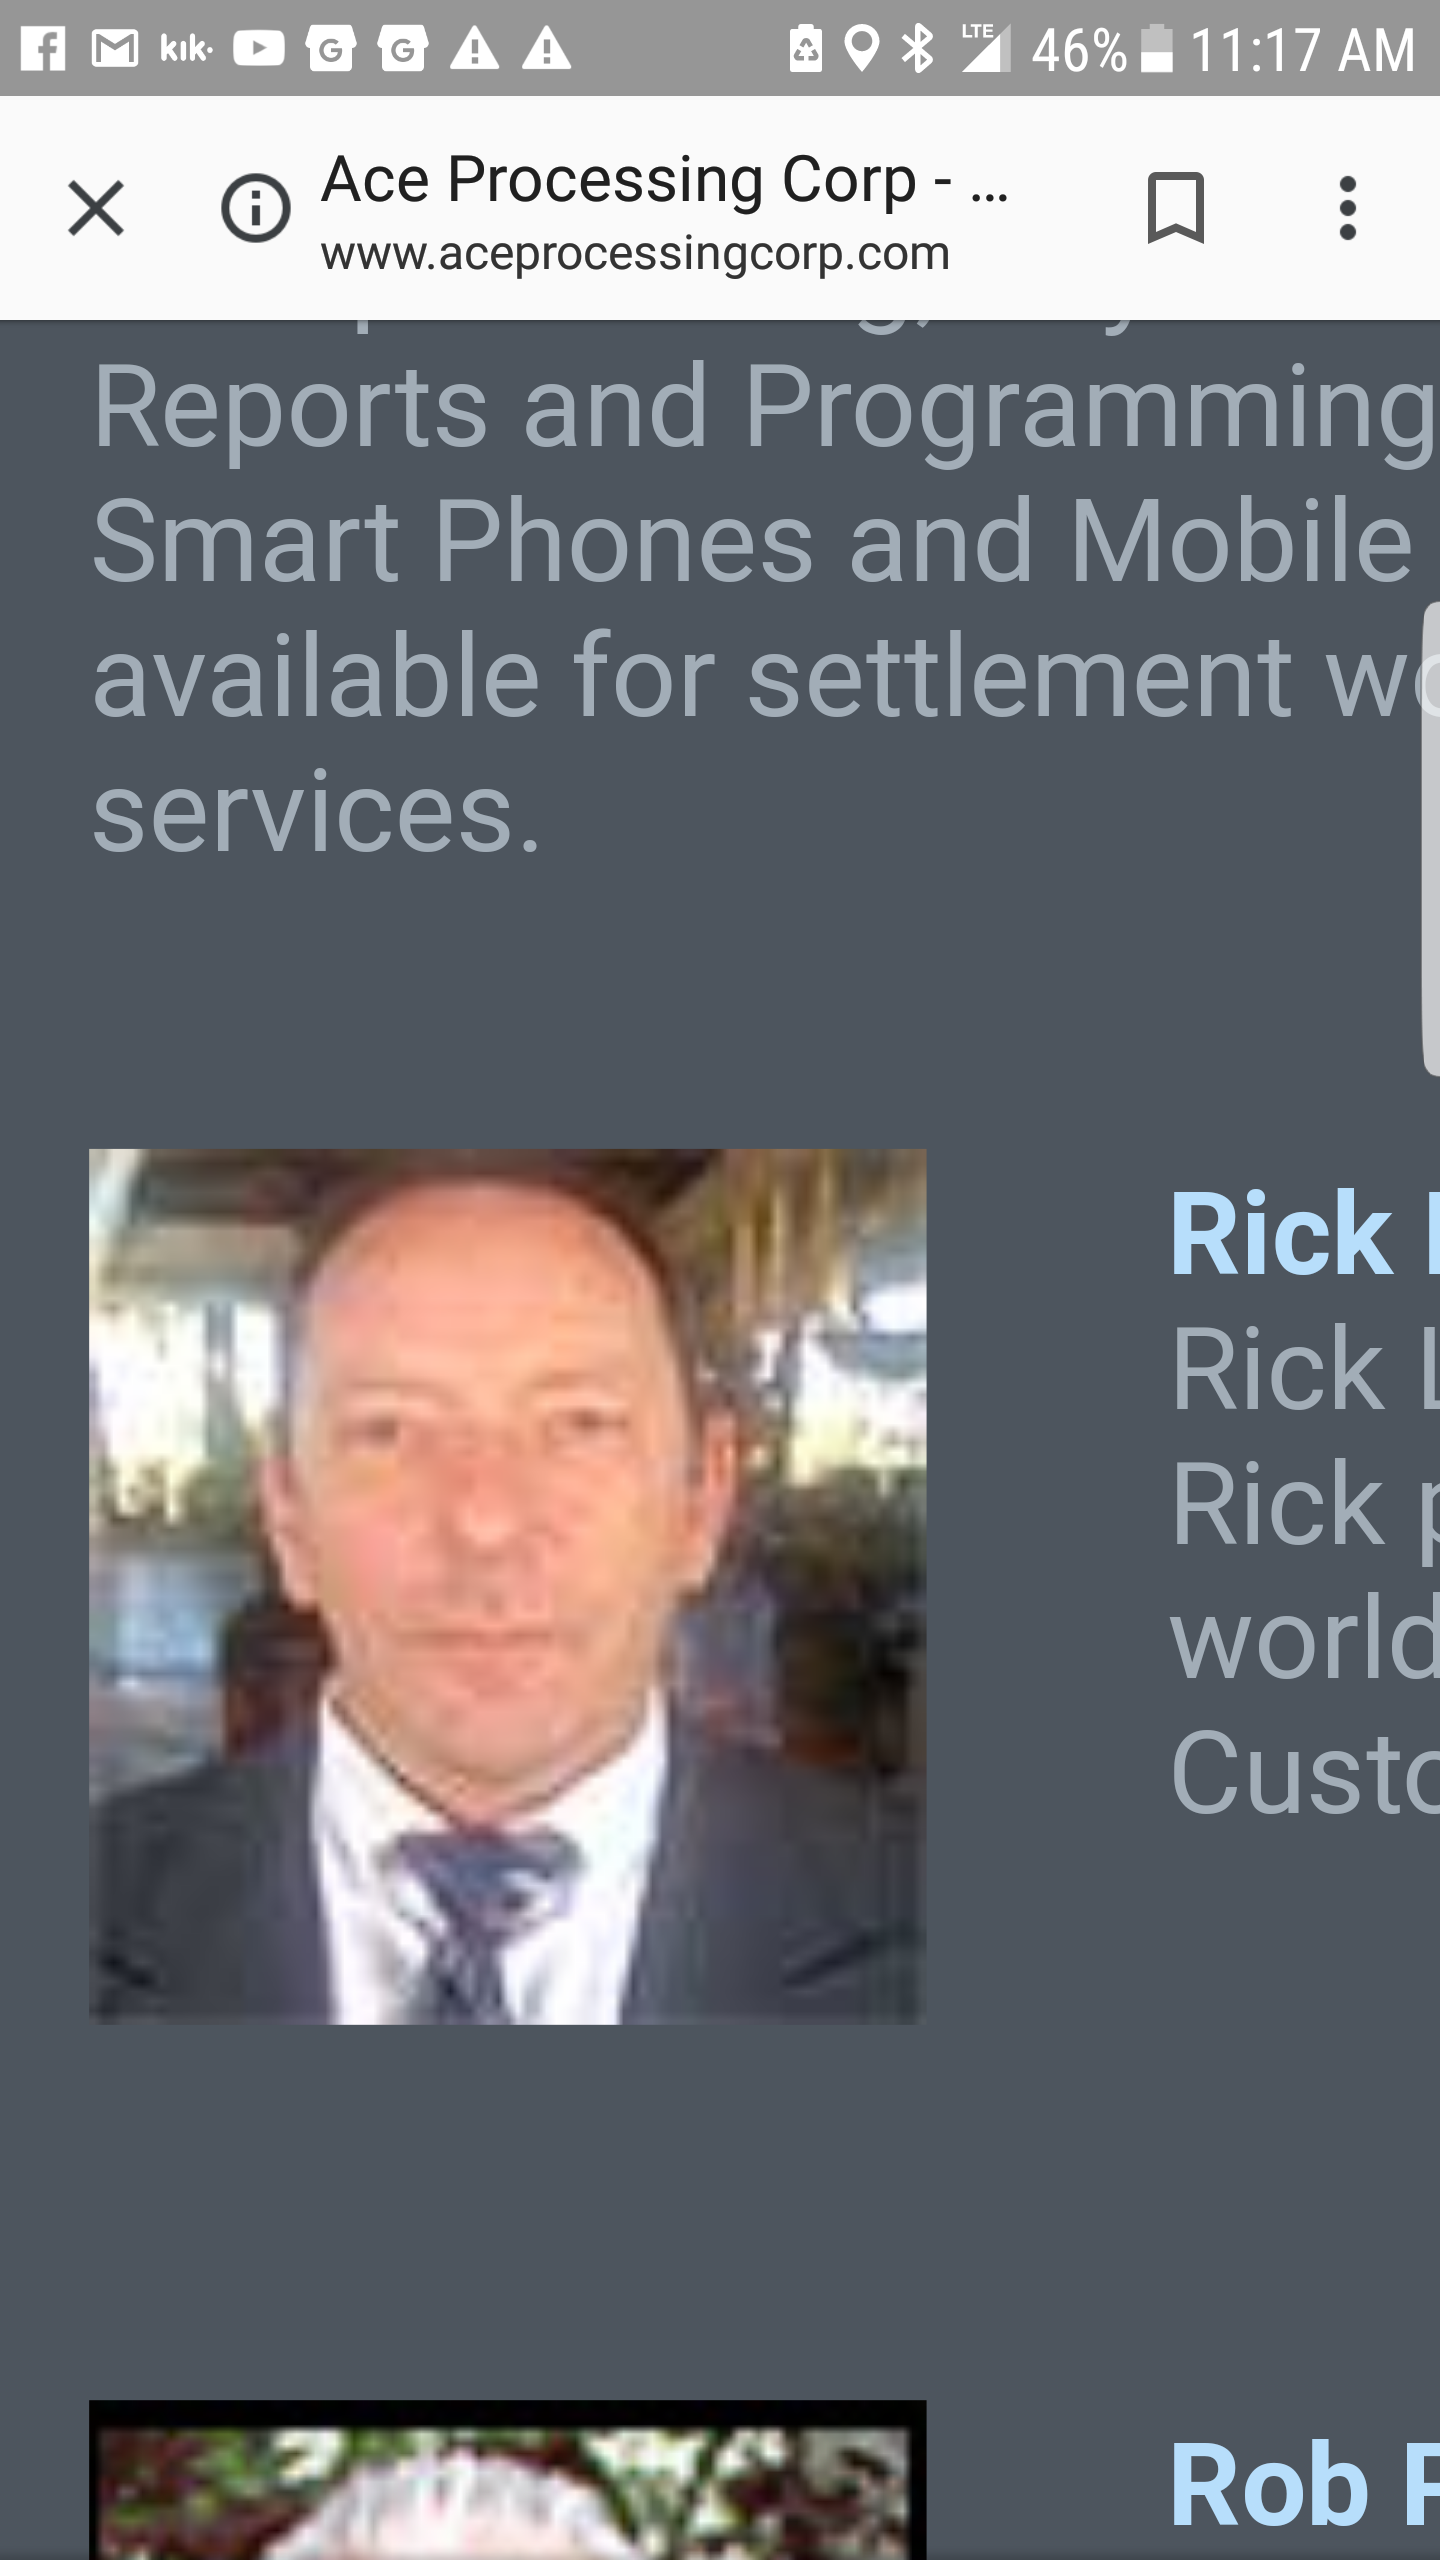 This is rick lee from ace processing corp 